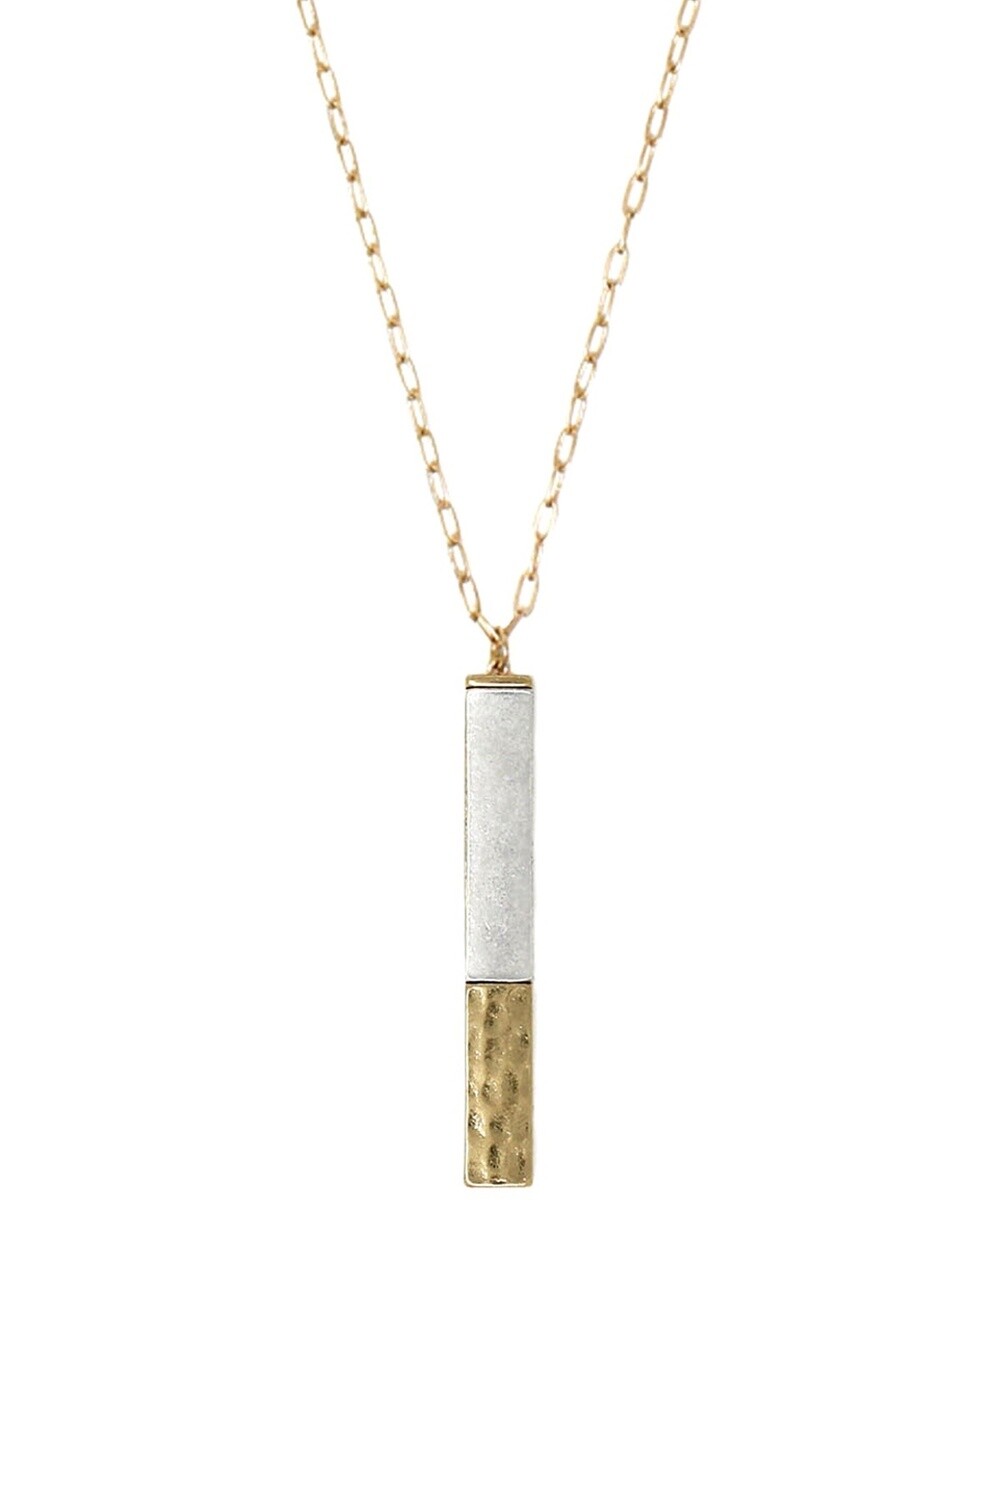 Gold & Silver Two-Tone Long Bar Necklace